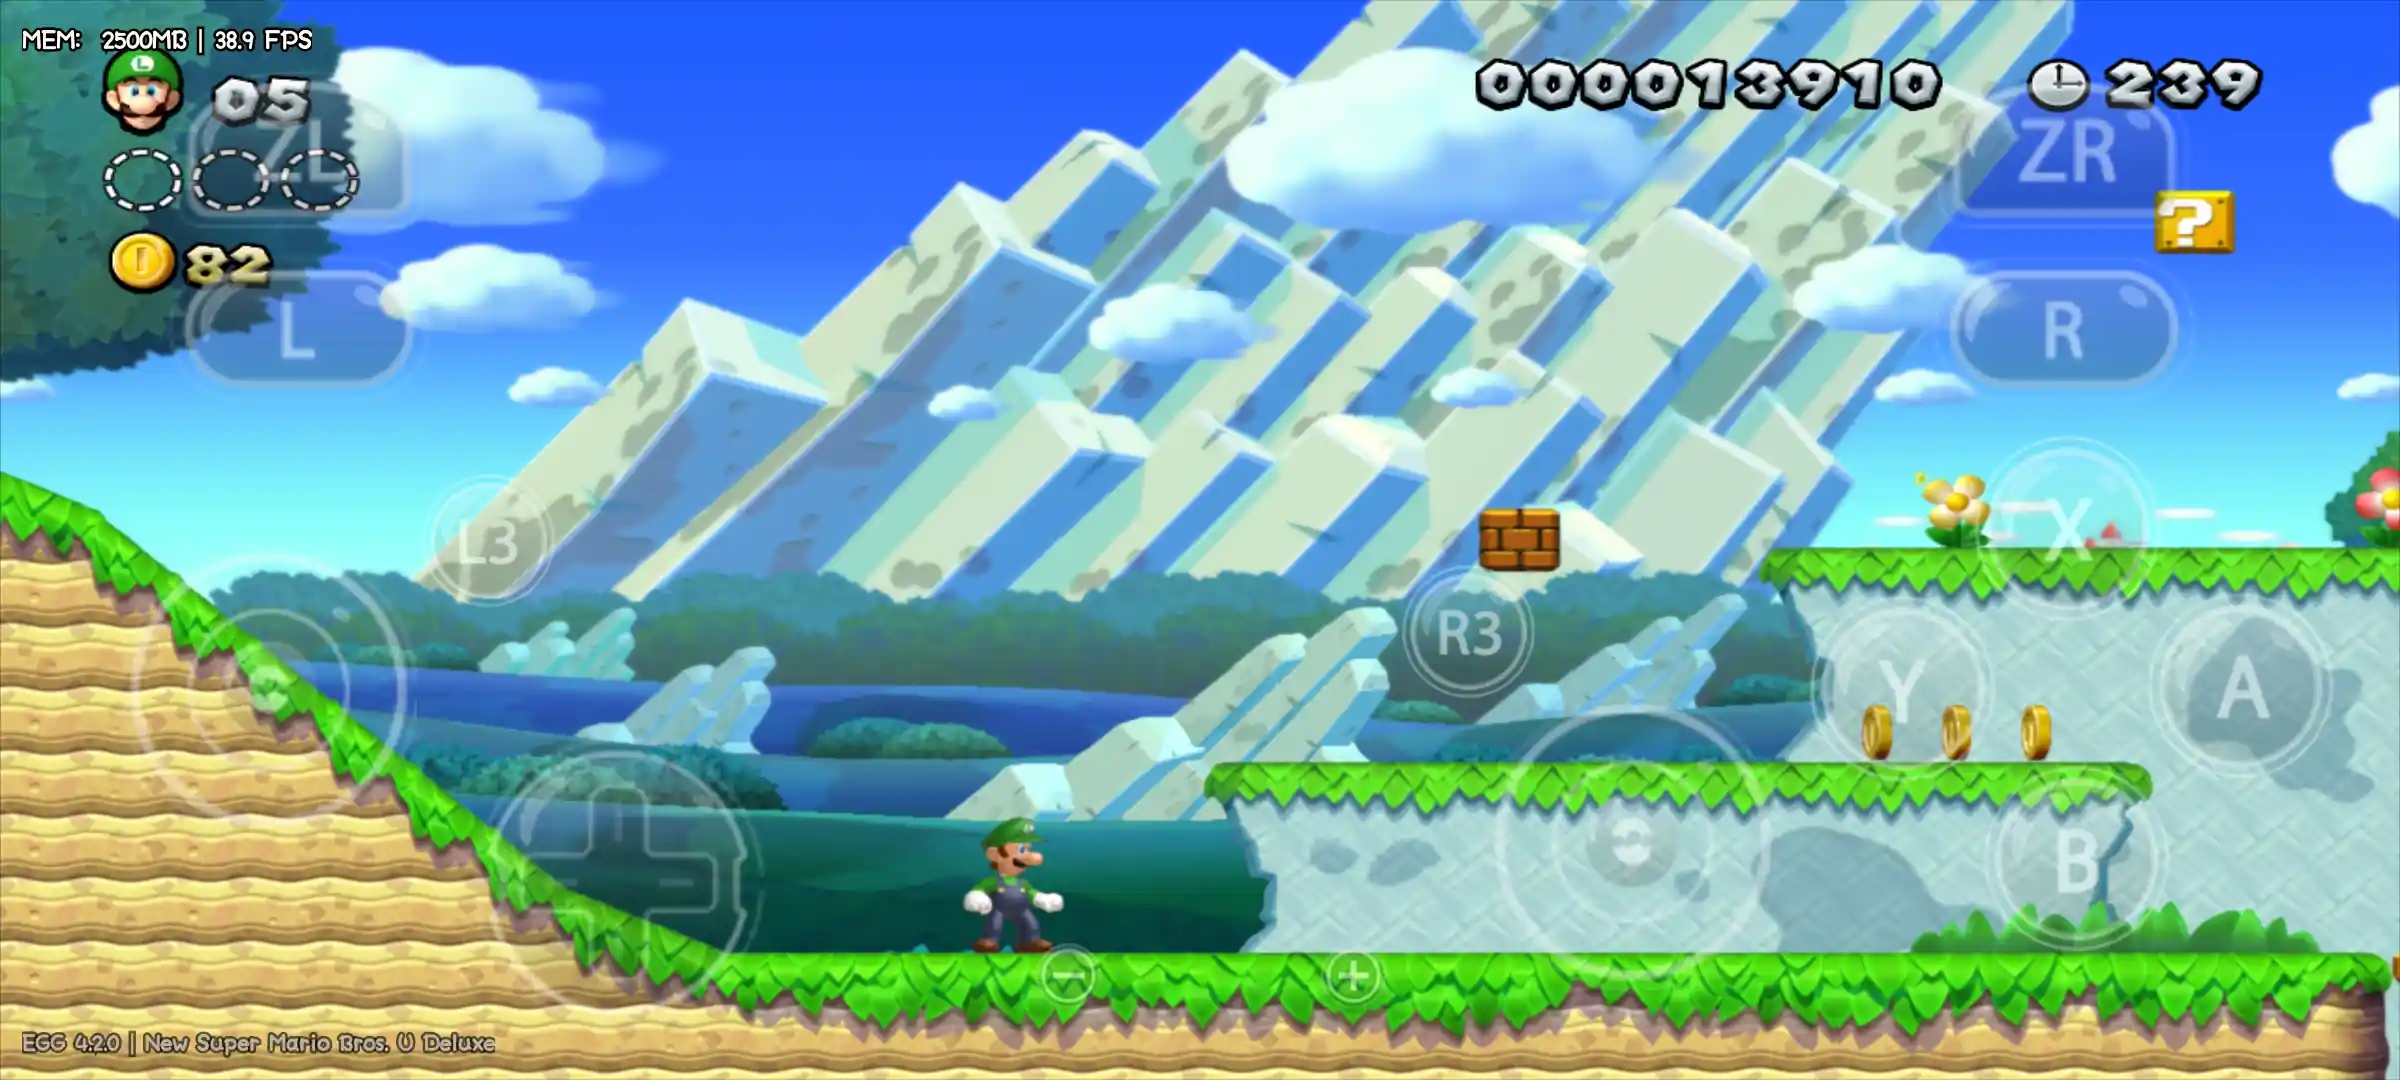 New Super Mario Bros u Deluxe APK + OBB download for Android - EGG NS Android Emulator